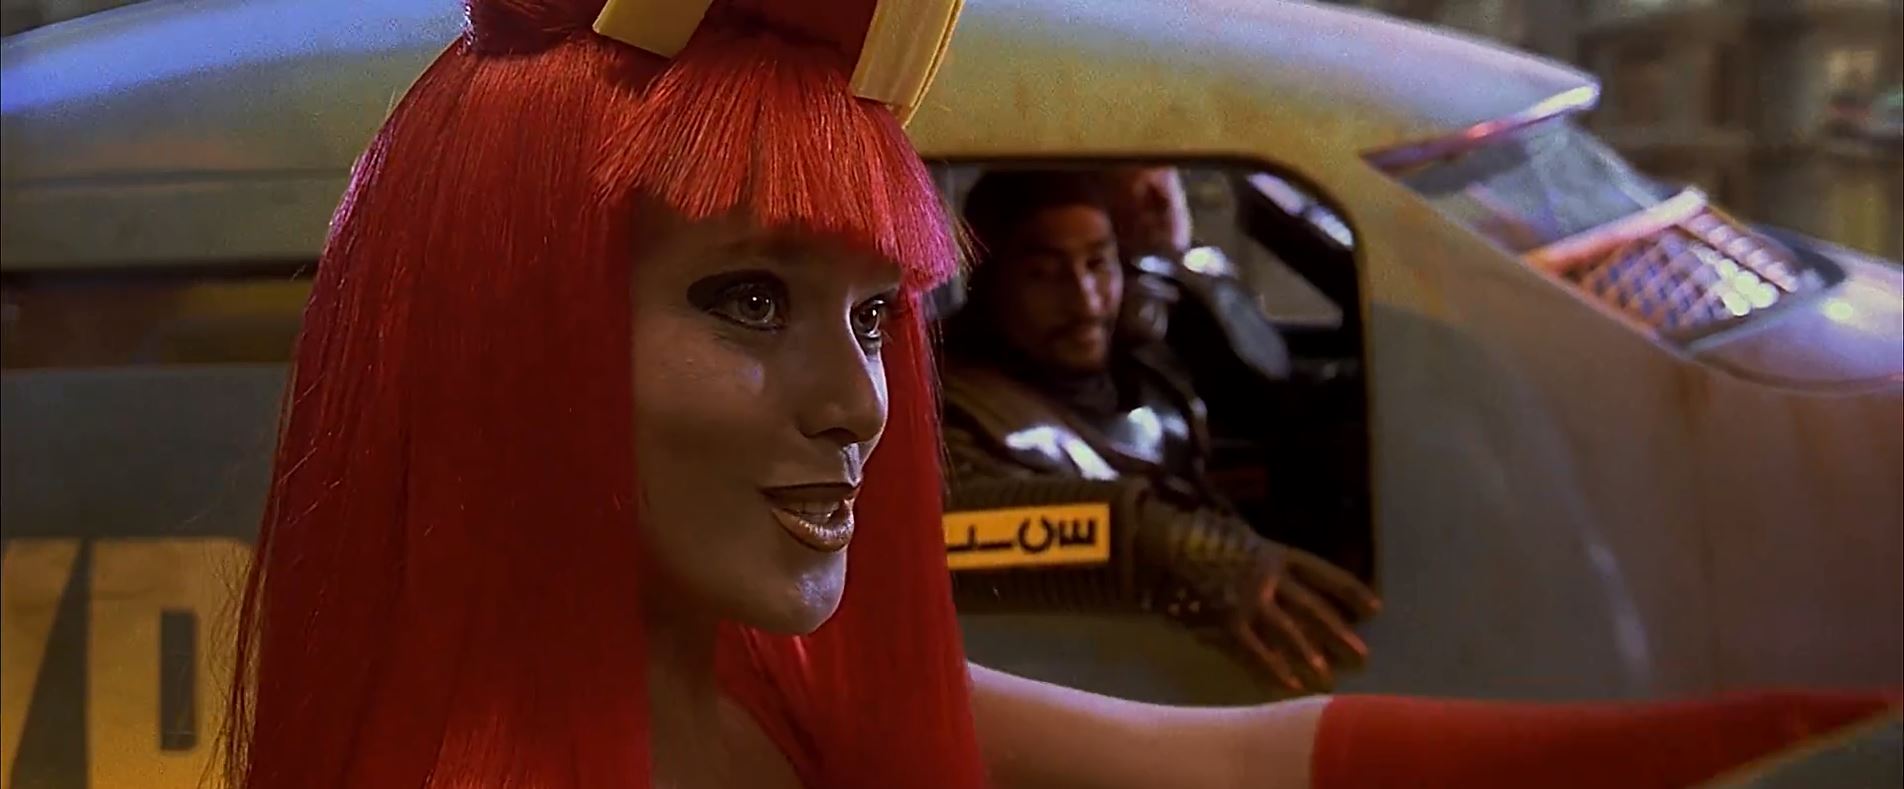 McDonalds Girl Fifth Element - The Fifth Element